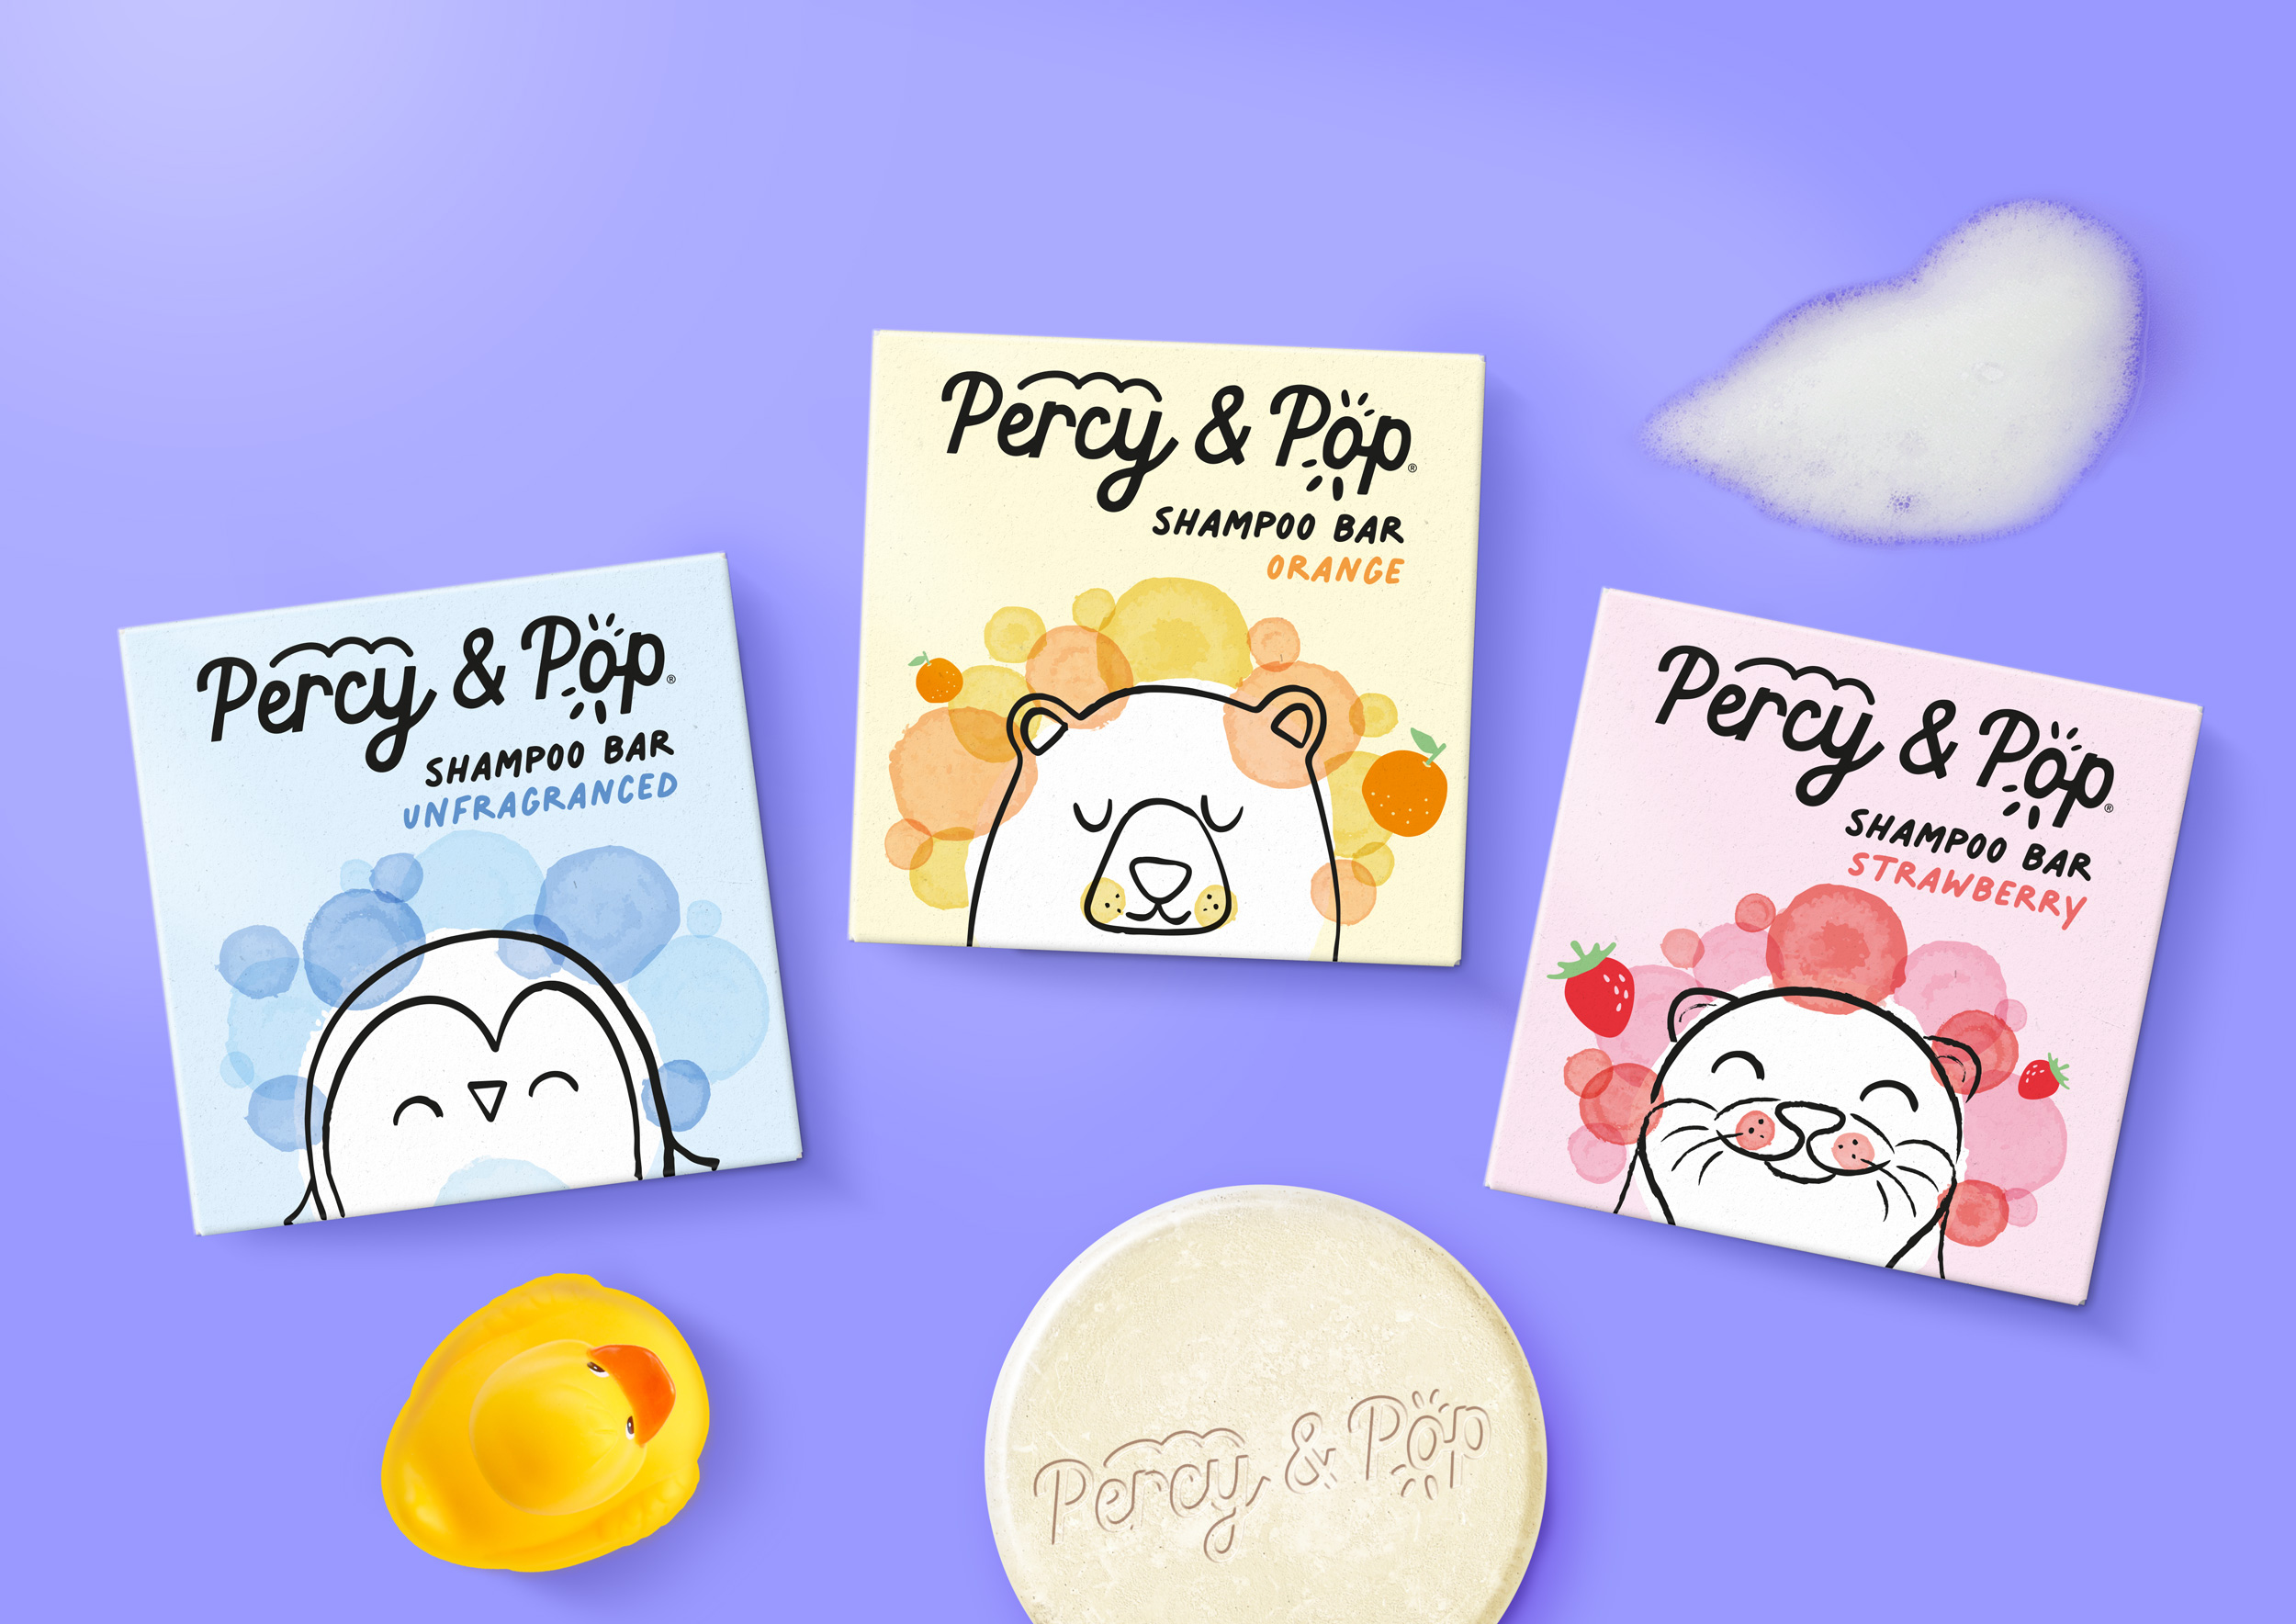 Brand Identity and Packaging Design for Percy & Pop